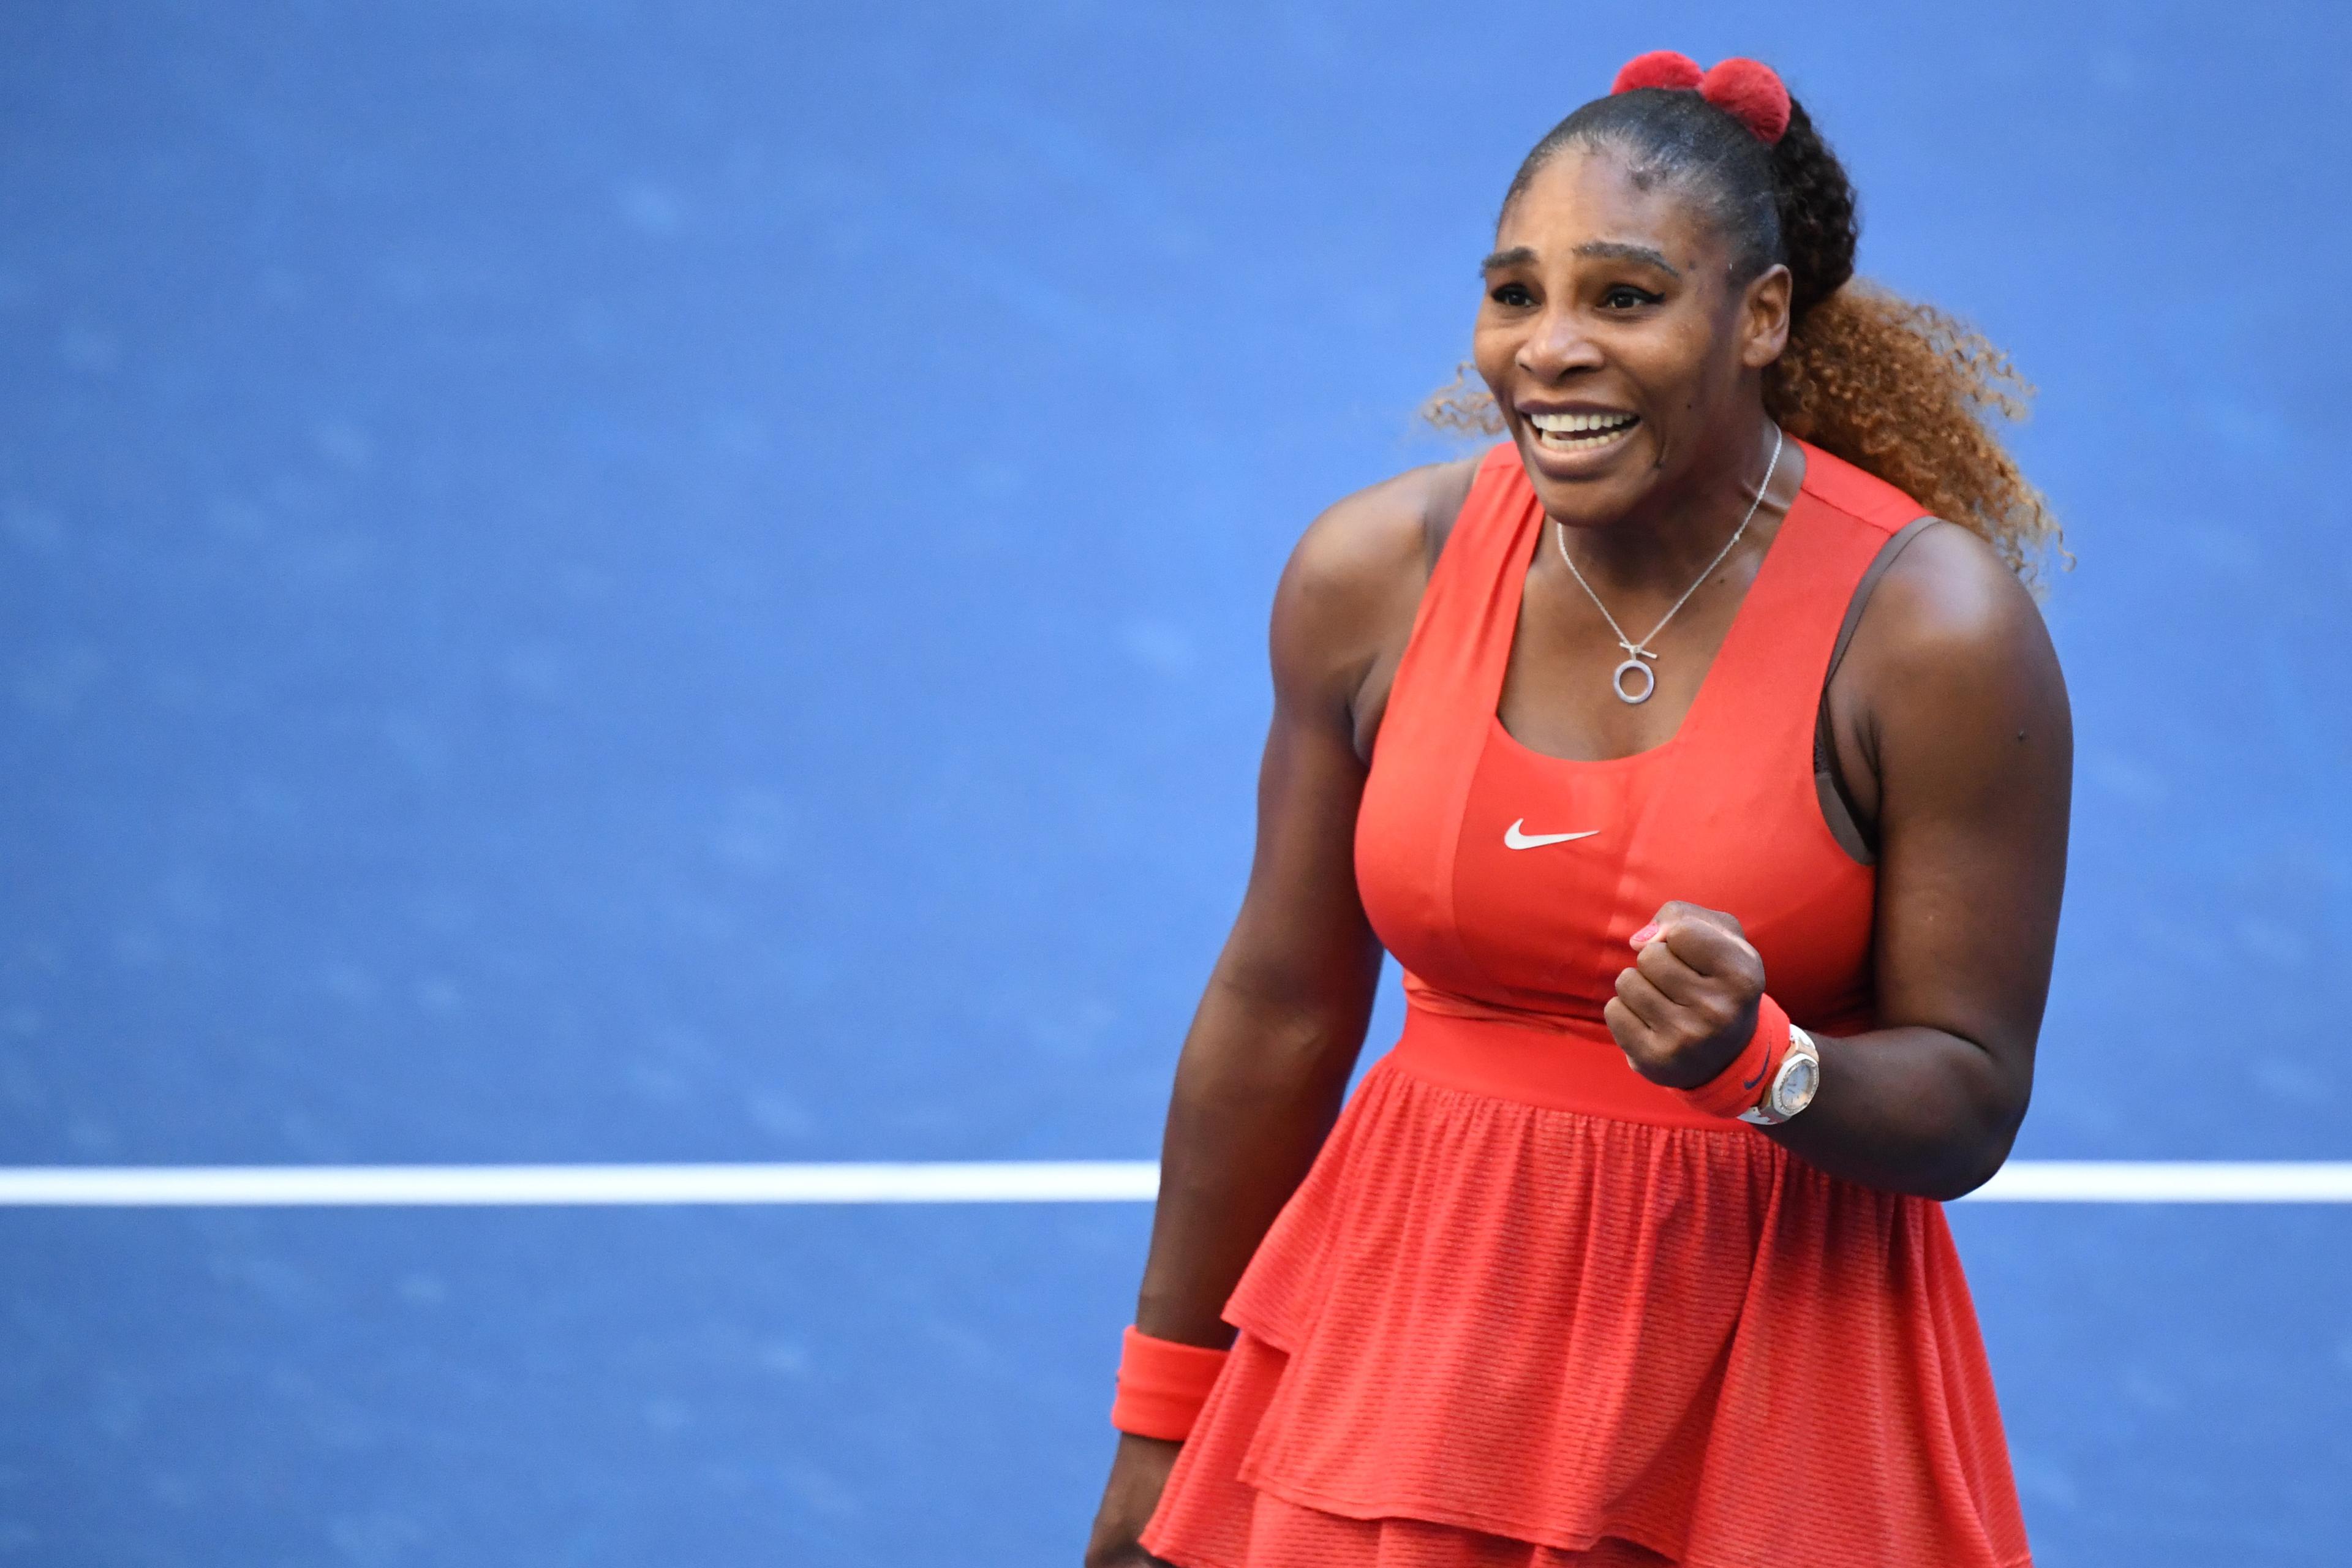 Sep 5, 2020; Flushing Meadows, New York, USA; Serena Williams of the United States celebrates after match point against Sloane Stephens of the United States (not pictured) on day six of the 2020 U.S. Open tennis tournament at USTA Billie Jean King National Tennis Center. Mandatory Credit: Danielle Parhizkaran-USA TODAY Sports / Danielle Parhizkaran-USA TODAY Sports